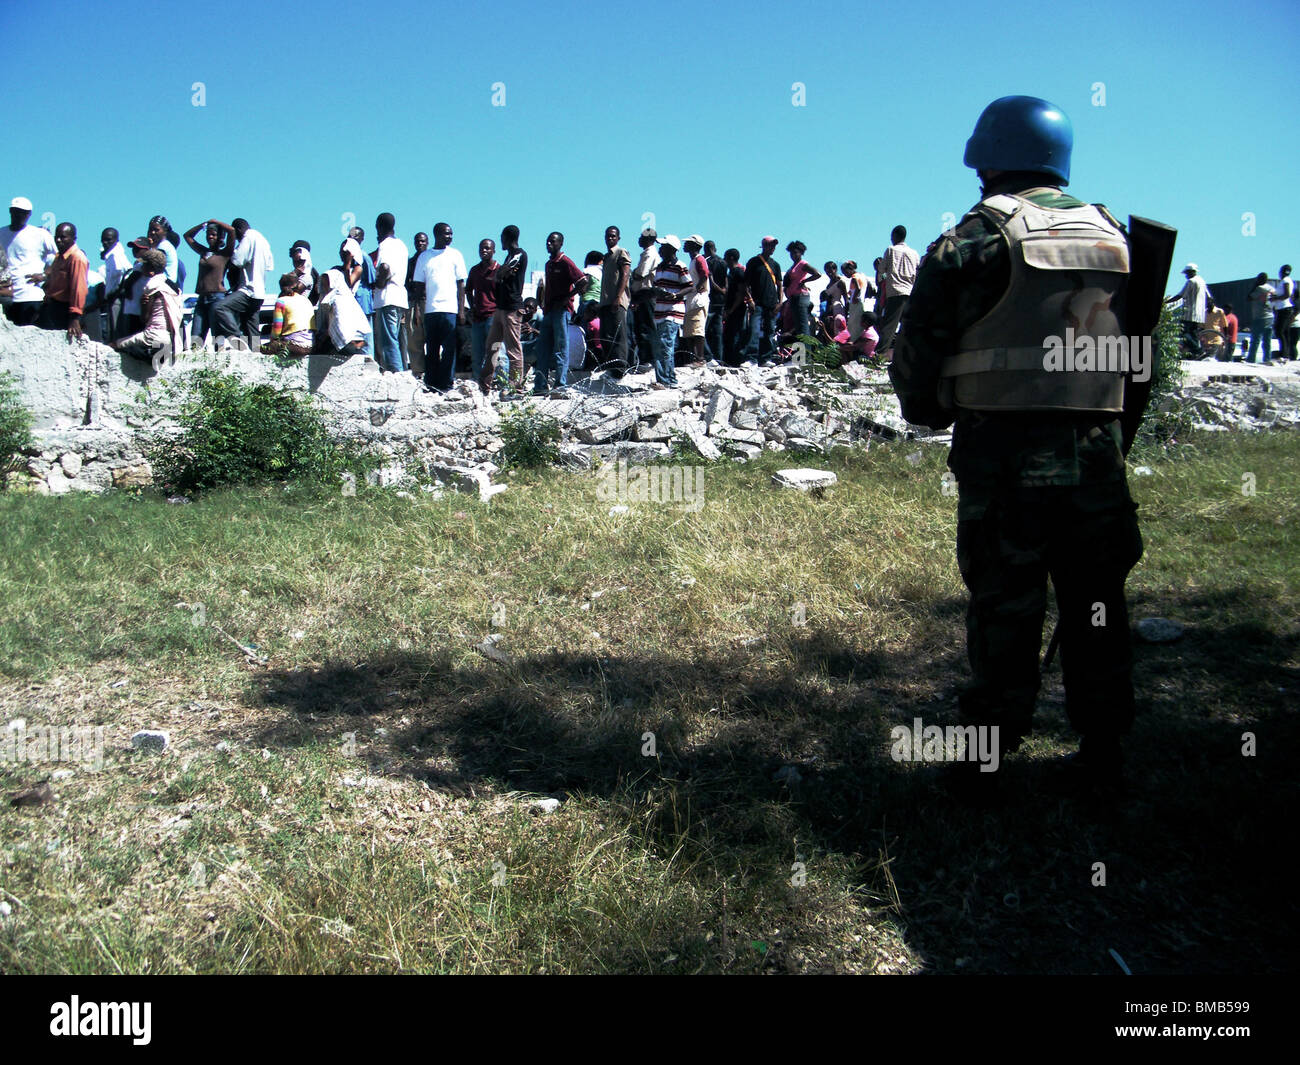 Haitians wait for food and water in Port au Prince after the Haiti earthquake Stock Photo